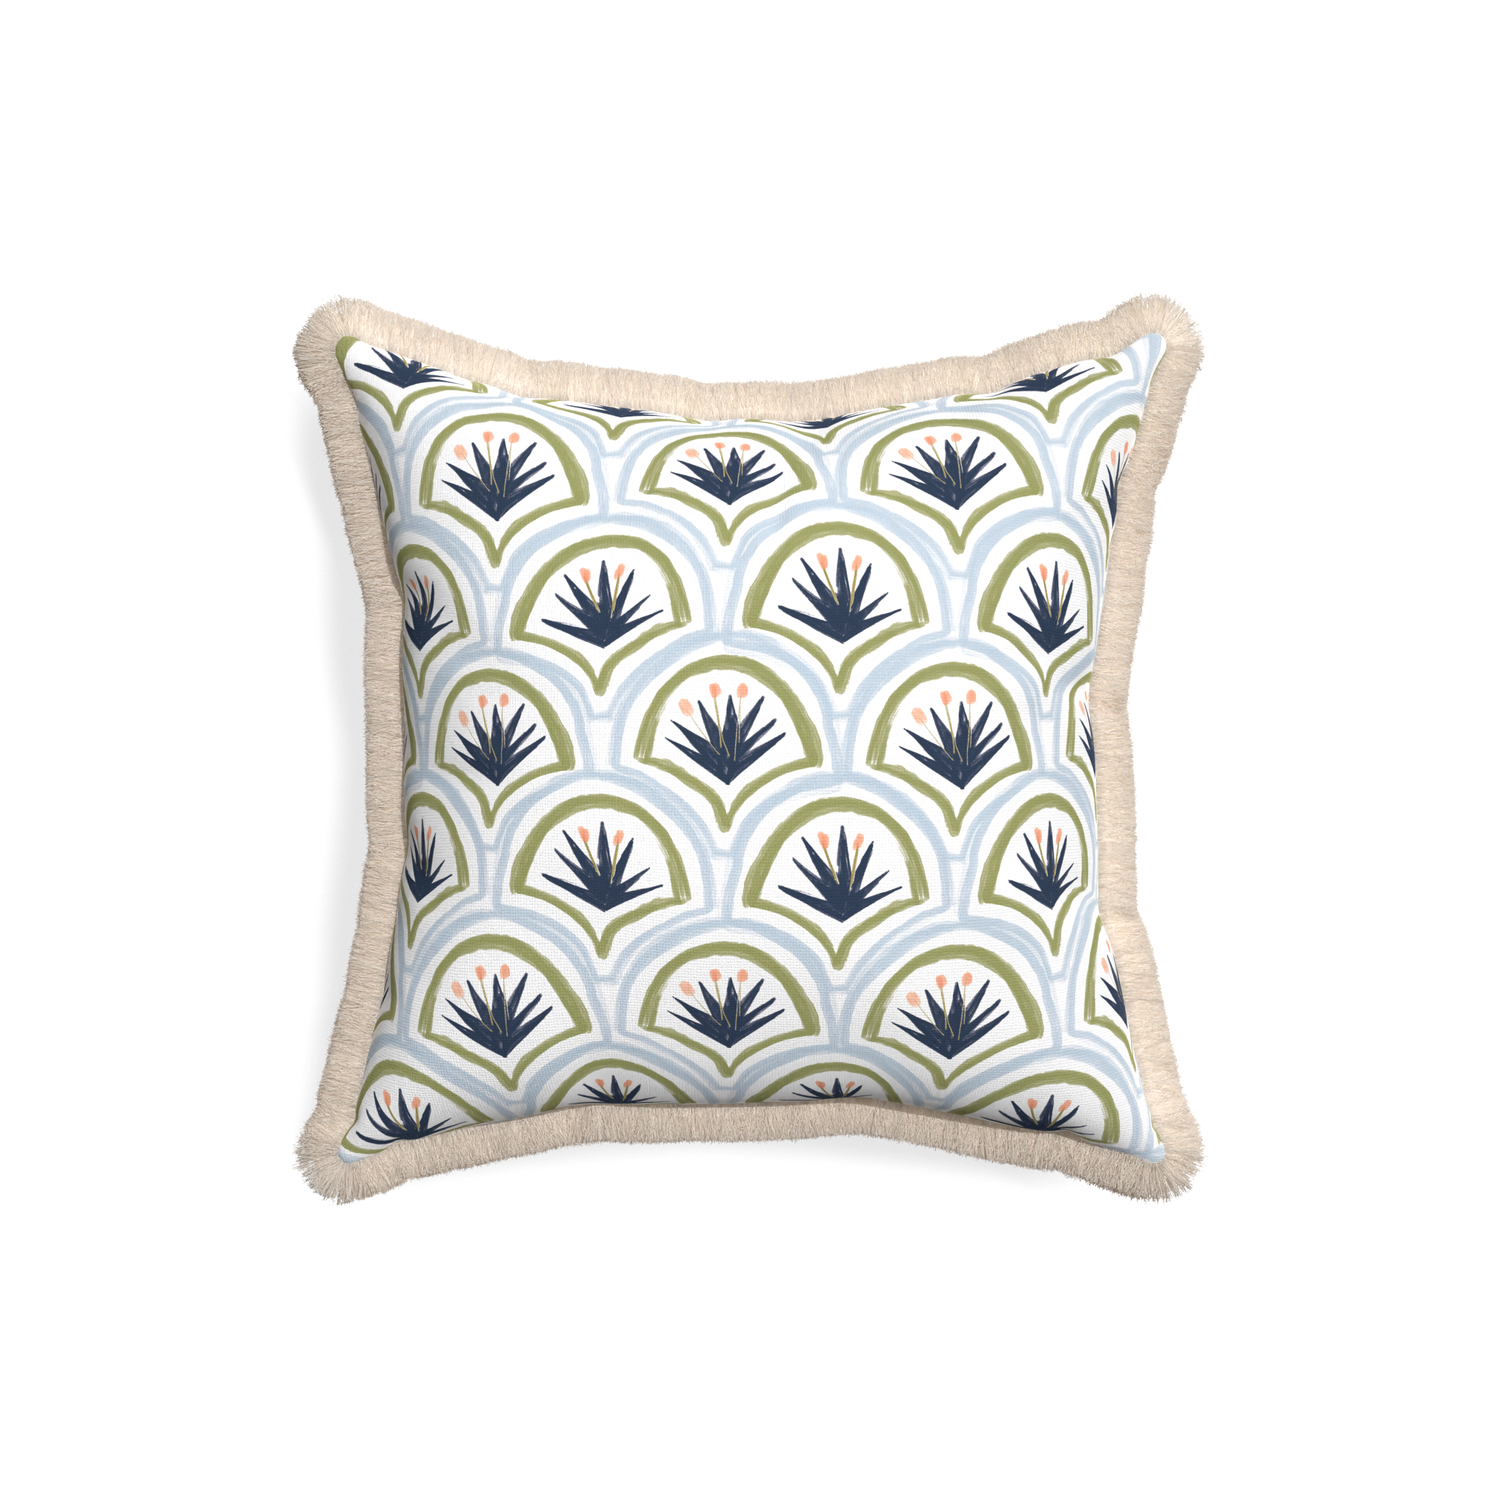 18-square thatcher midnight custom art deco palm patternpillow with cream fringe on white background